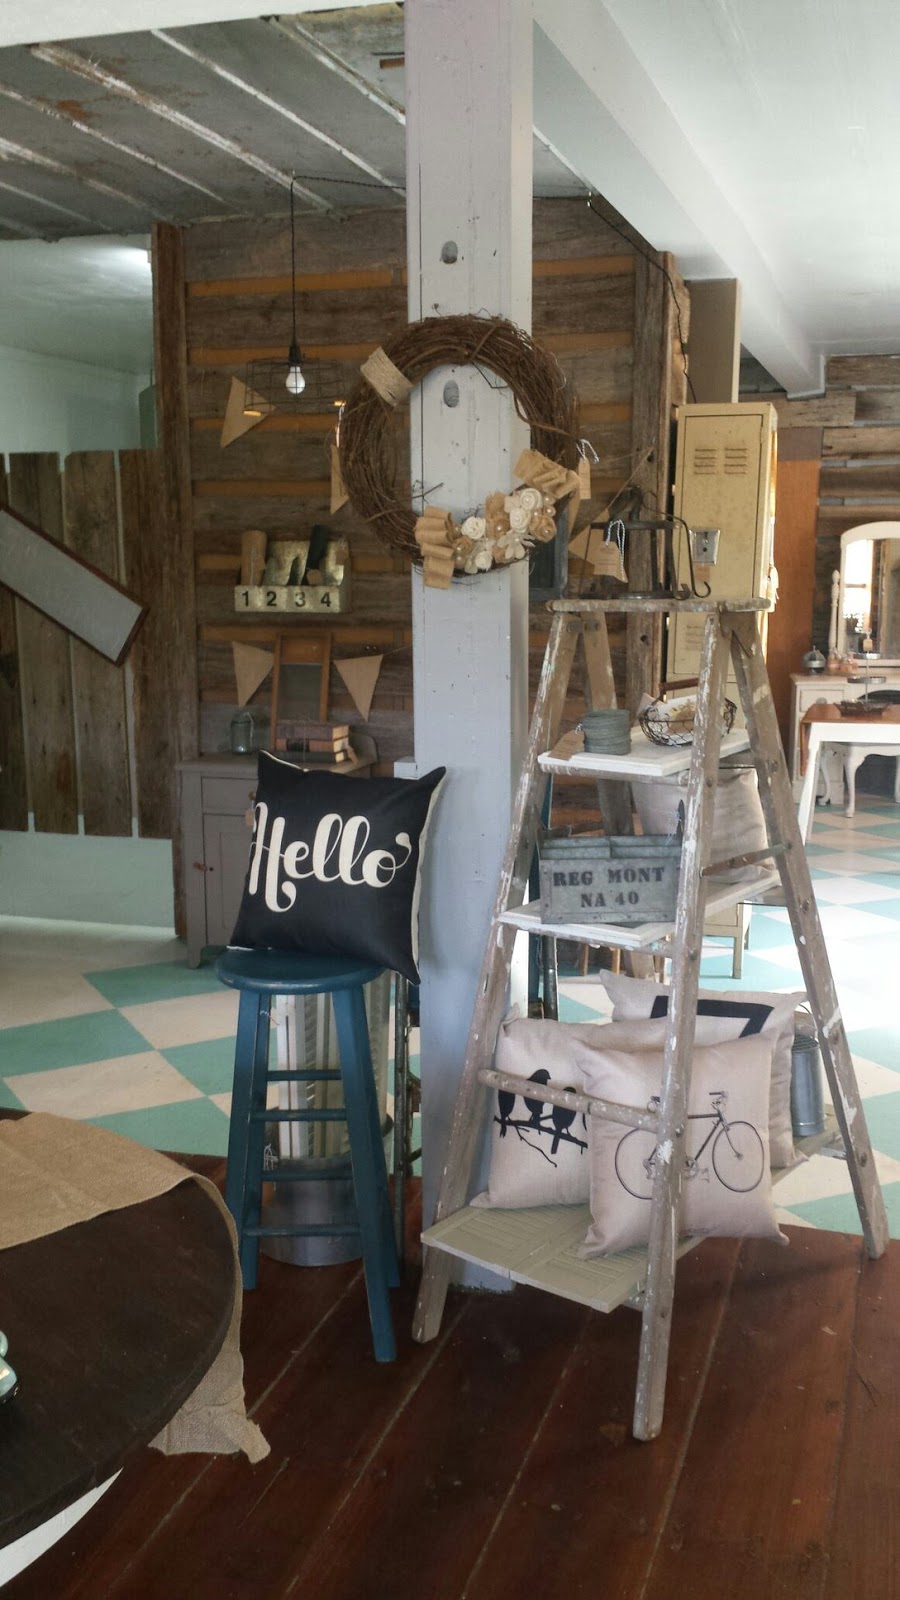 Farm Fresh Vintage Finds and Creamery | 1861 Fairview Blvd, Fairview, TN 37062, USA | Phone: (615) 415-1745